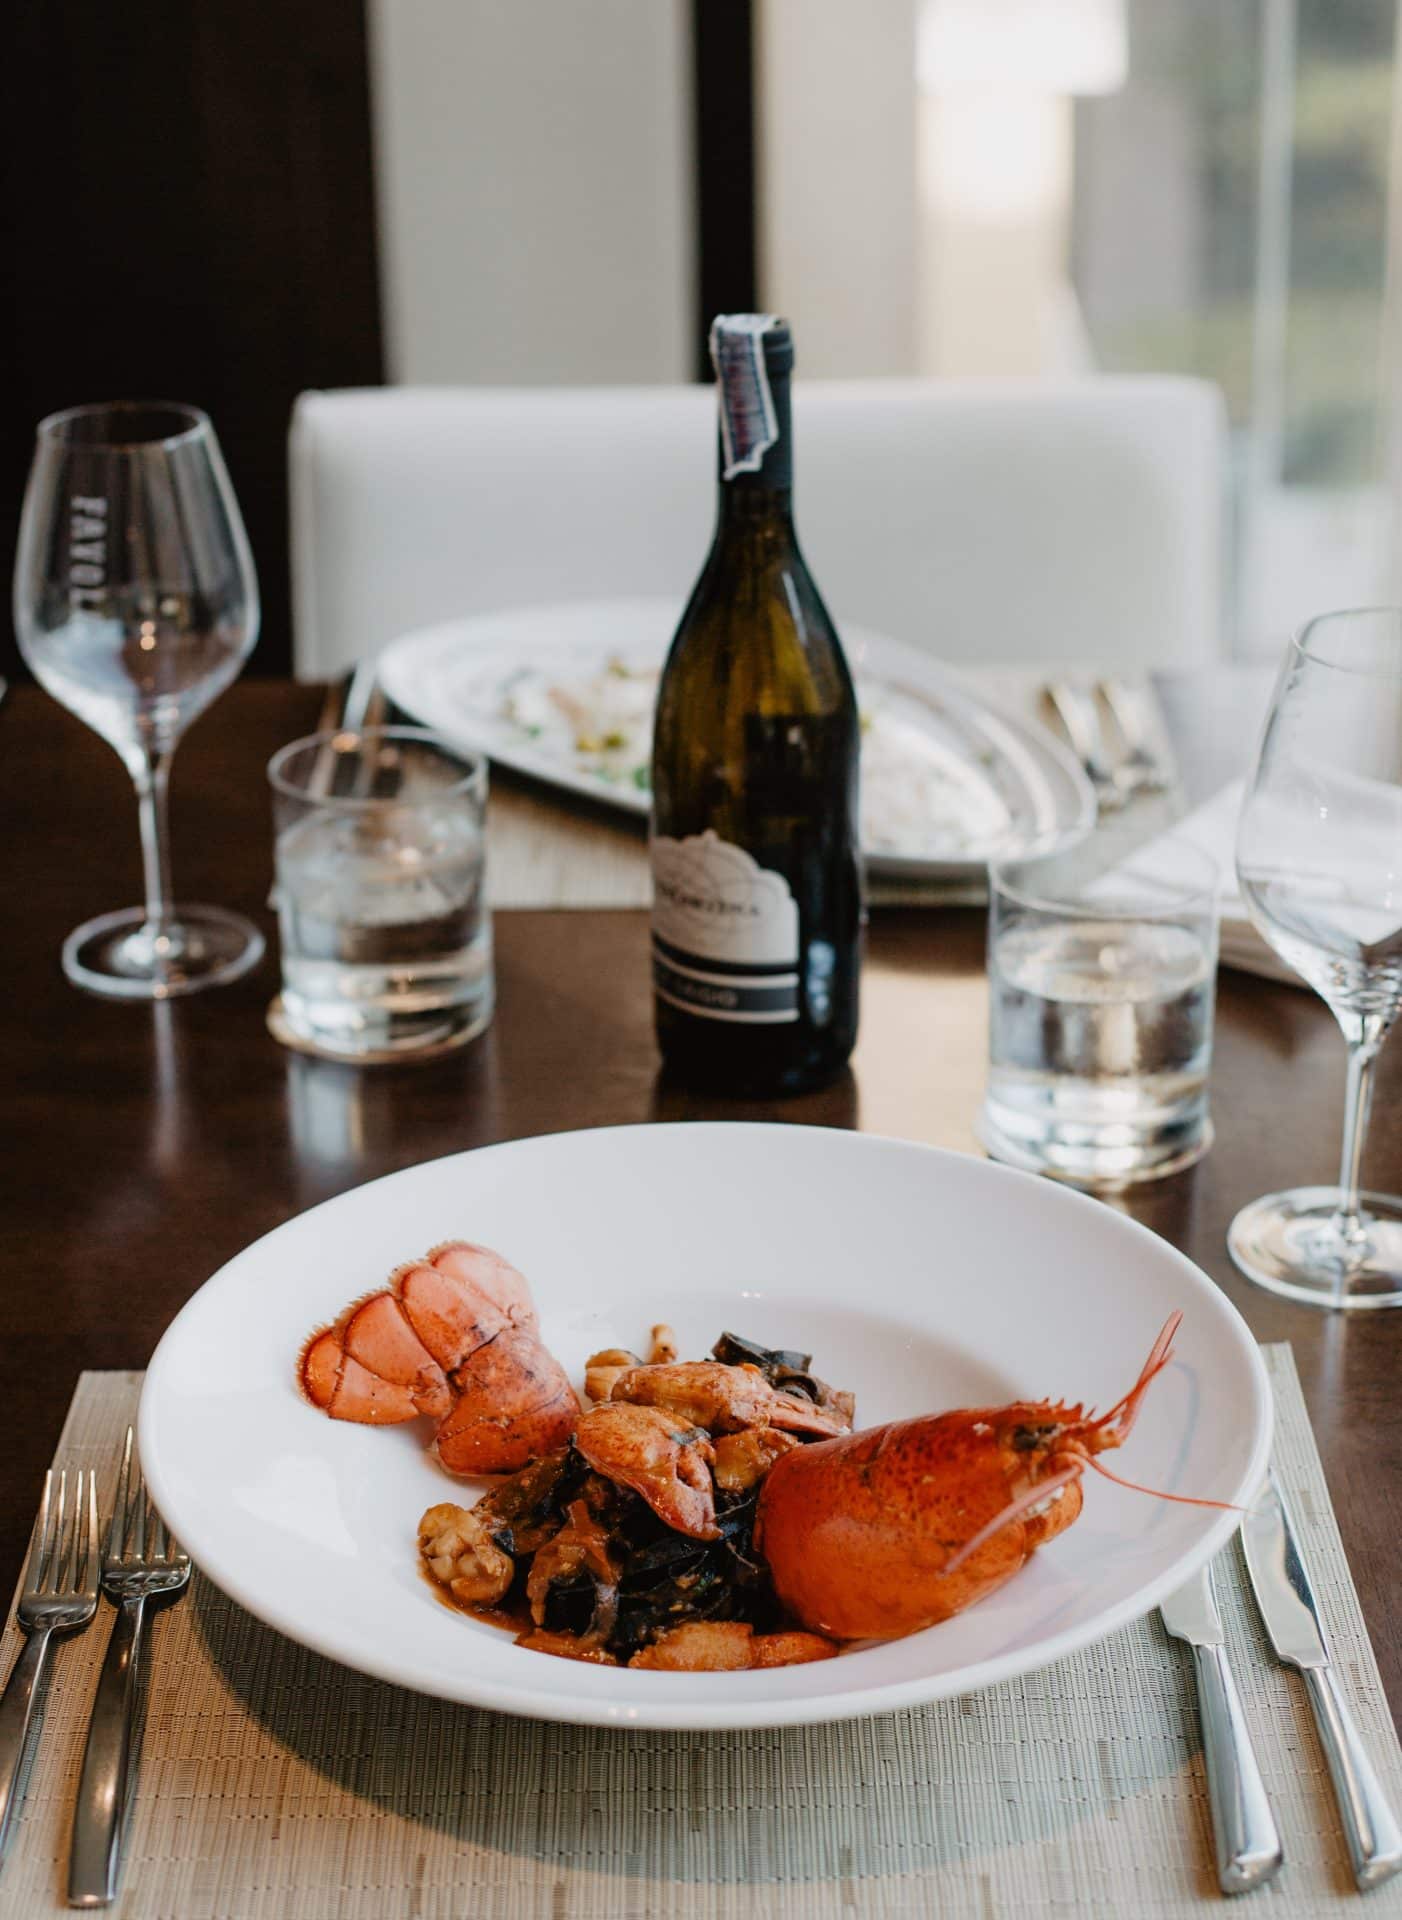 Top 3 Lobster Dishes and Wine Pairings